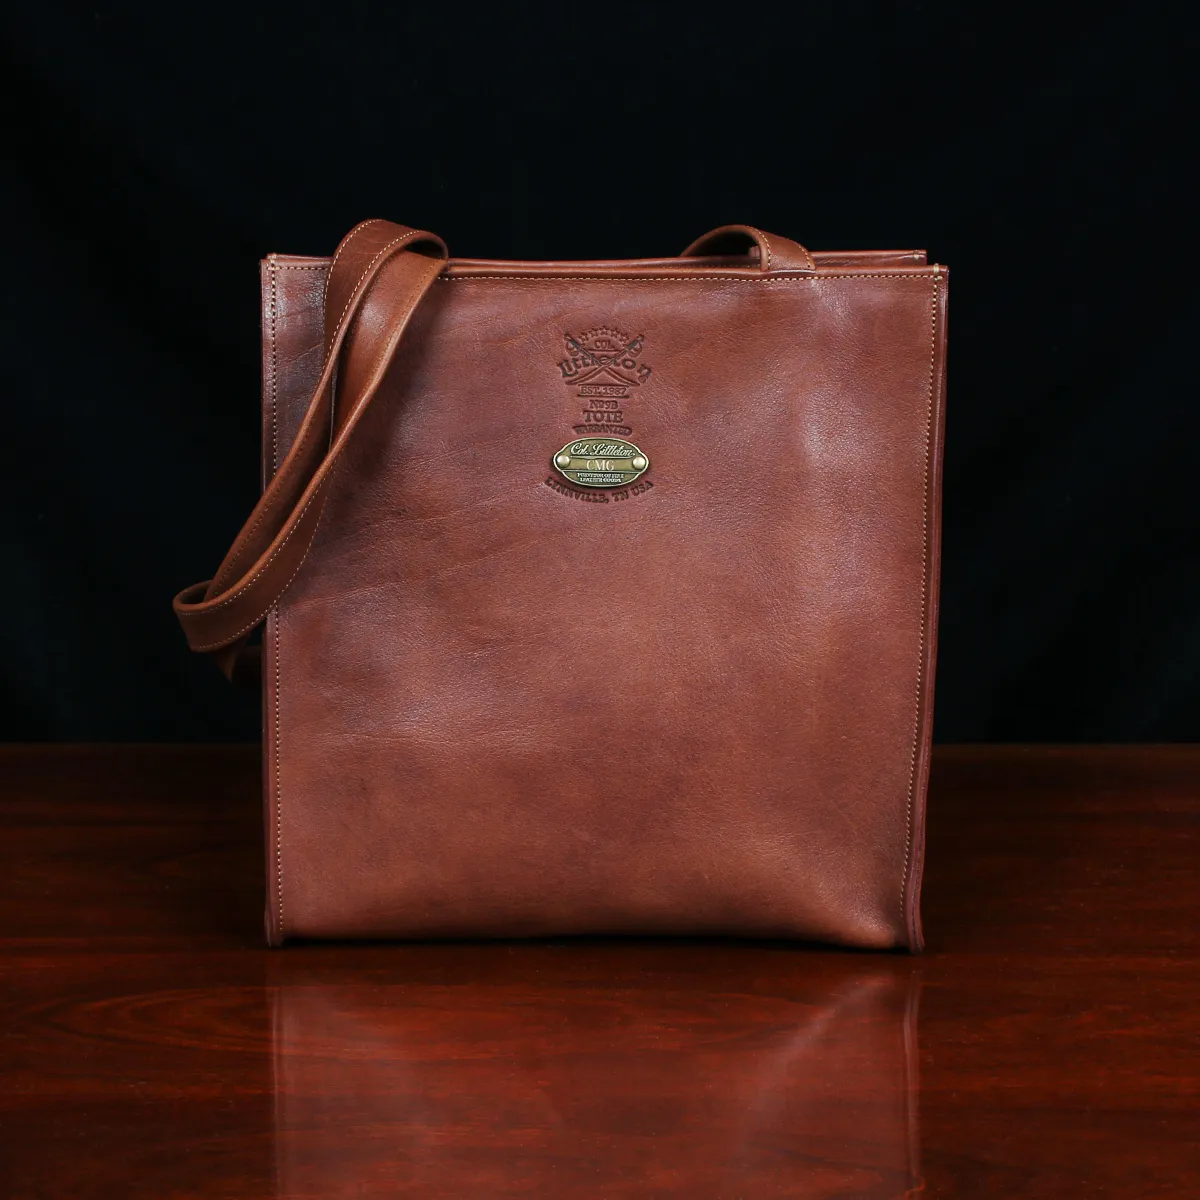 No. 9B Leather Tote in Vintage Brown - front view - on wood table with dark background